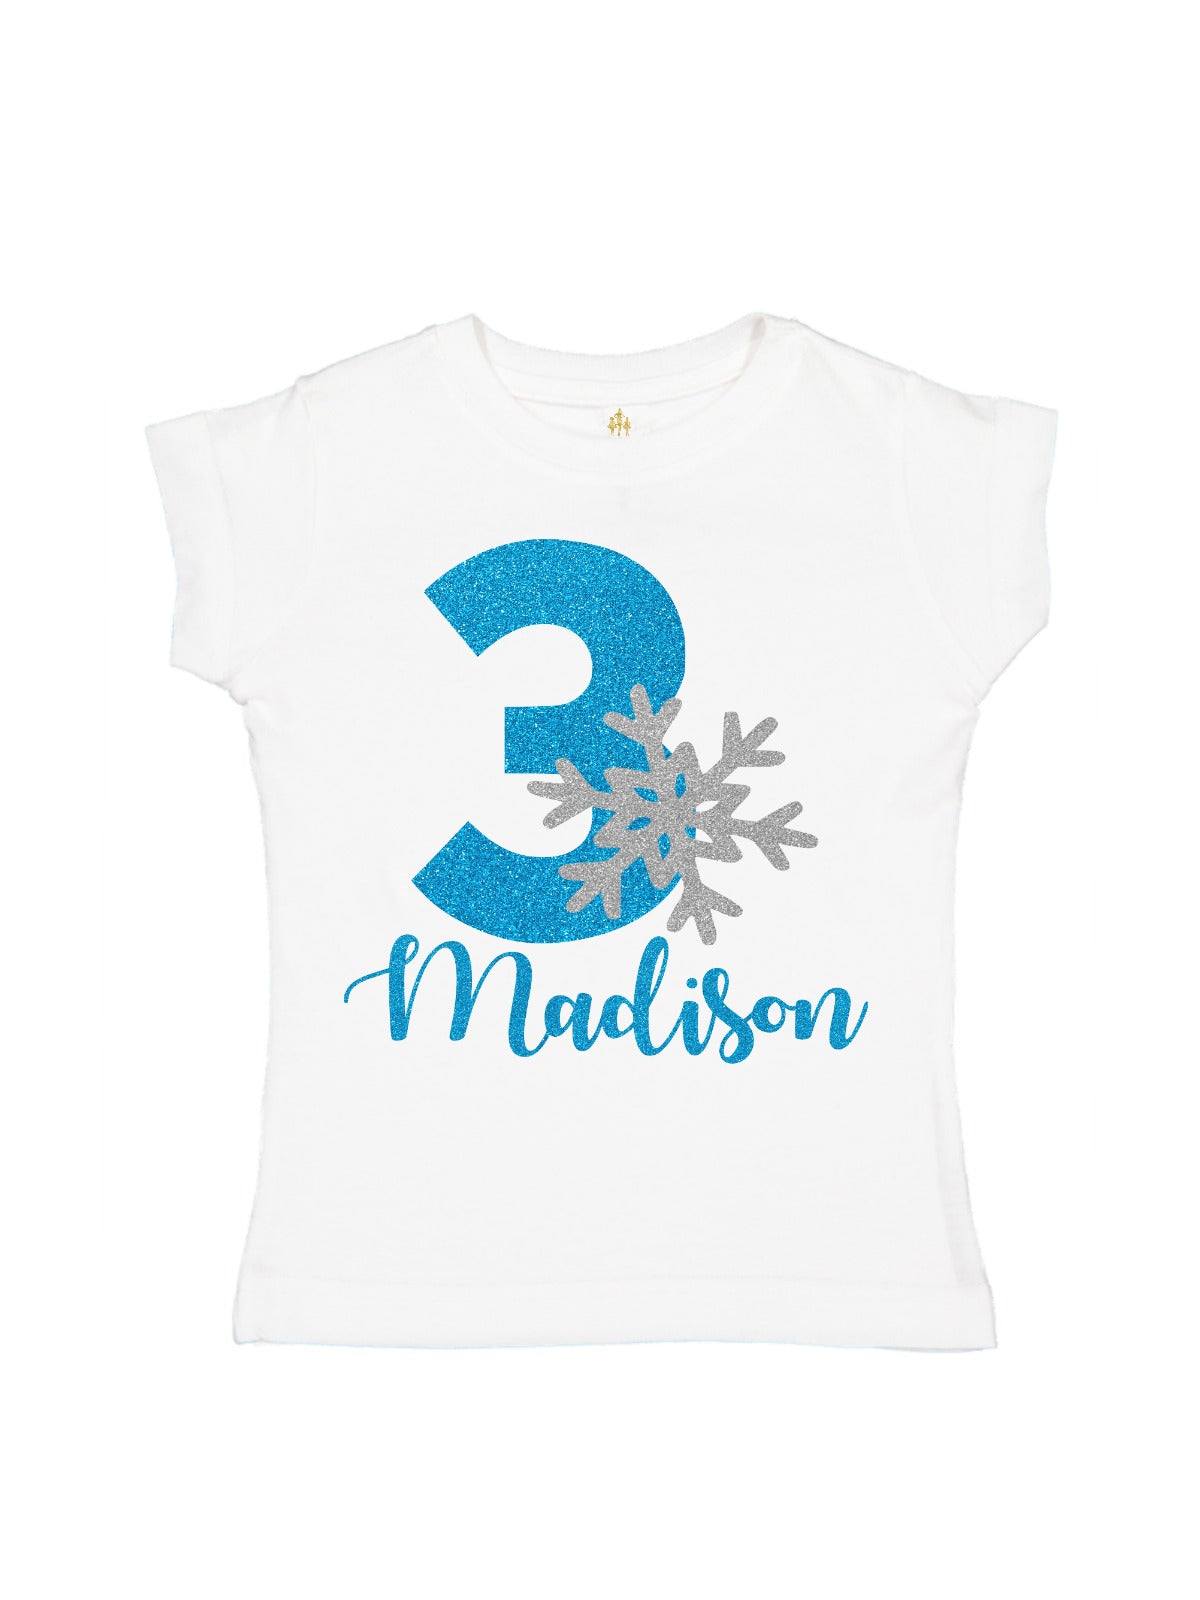 glitter snowflake silver and blue girl's t-shirt